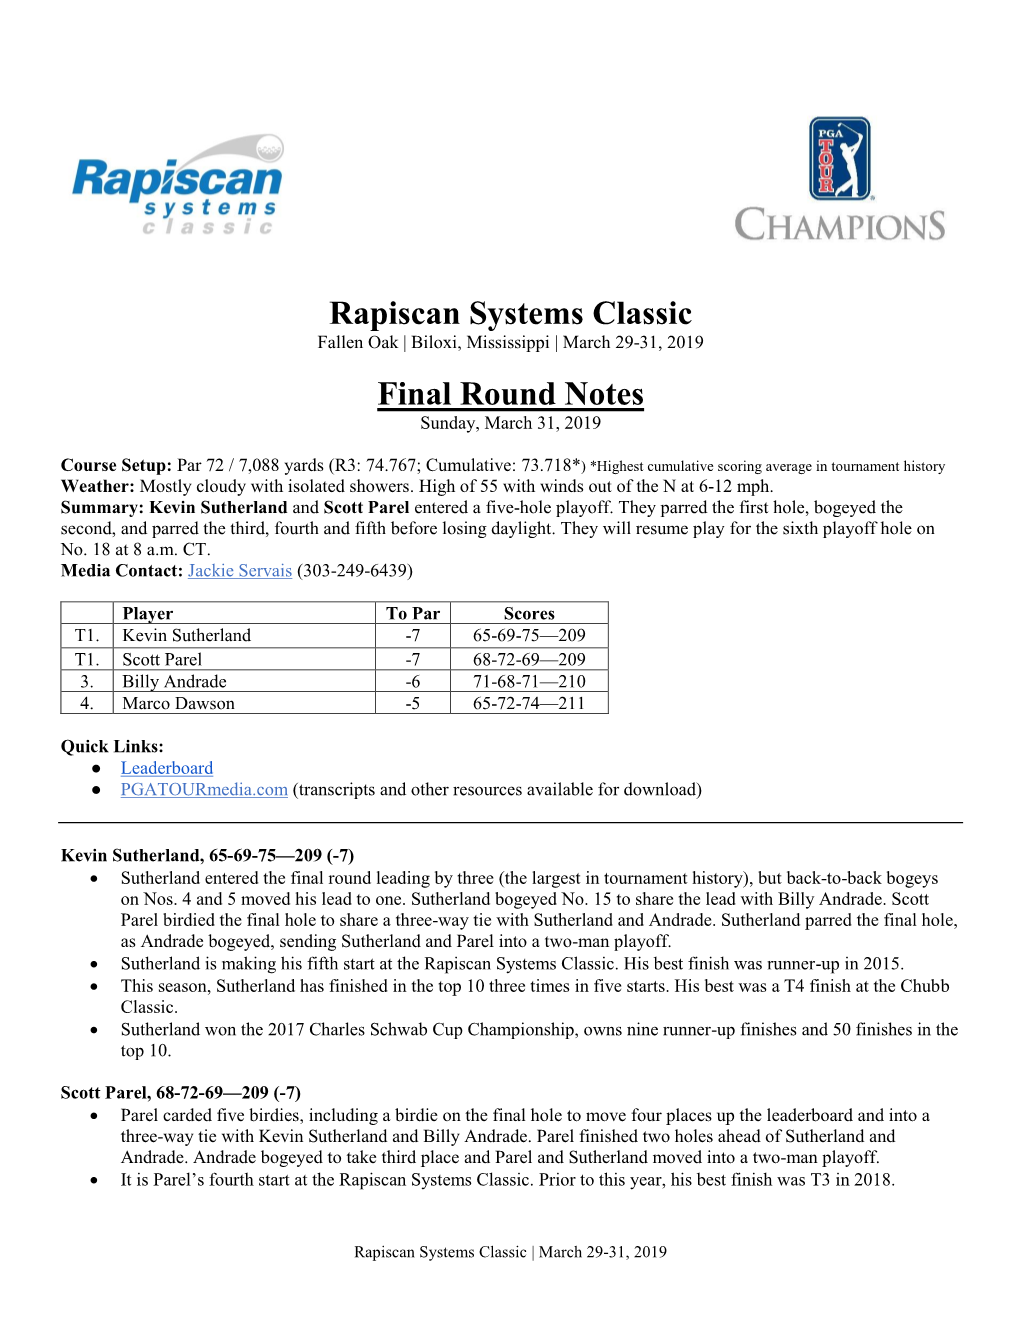 Rapiscan Systems Classic Final Round Notes